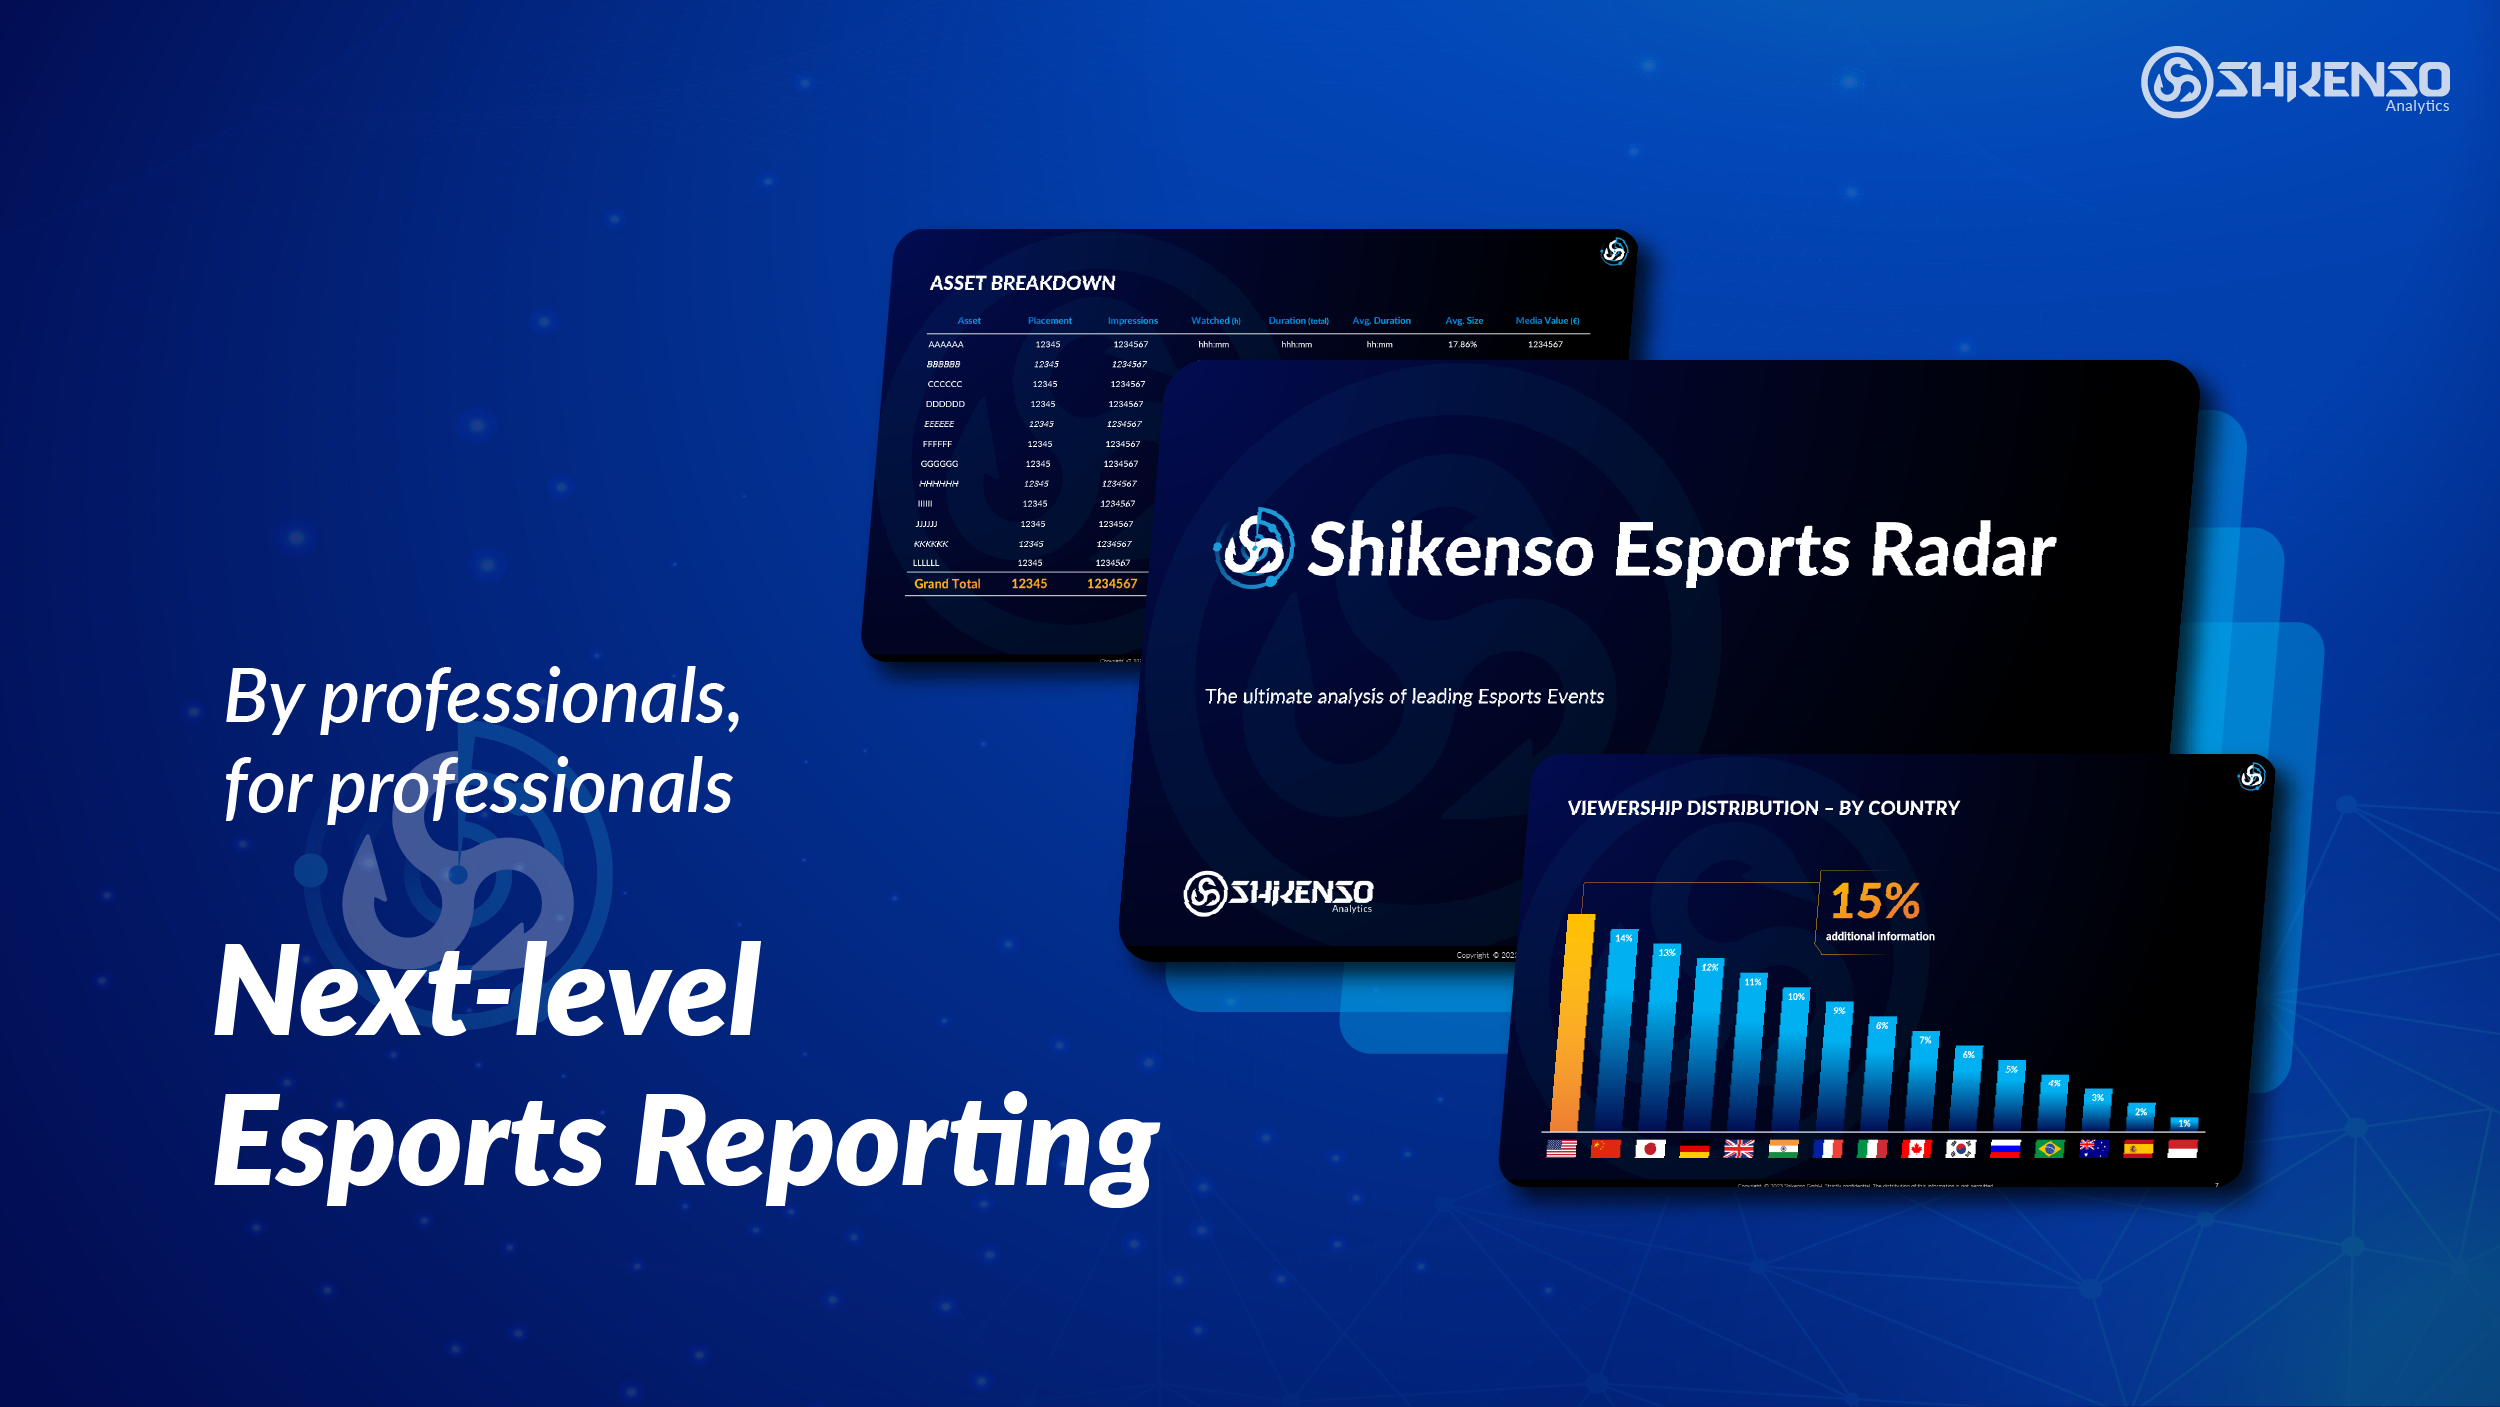 Introducing a new product: Shikenso Esports Radar, a comprehensive data analytics report for major esports tournaments and events